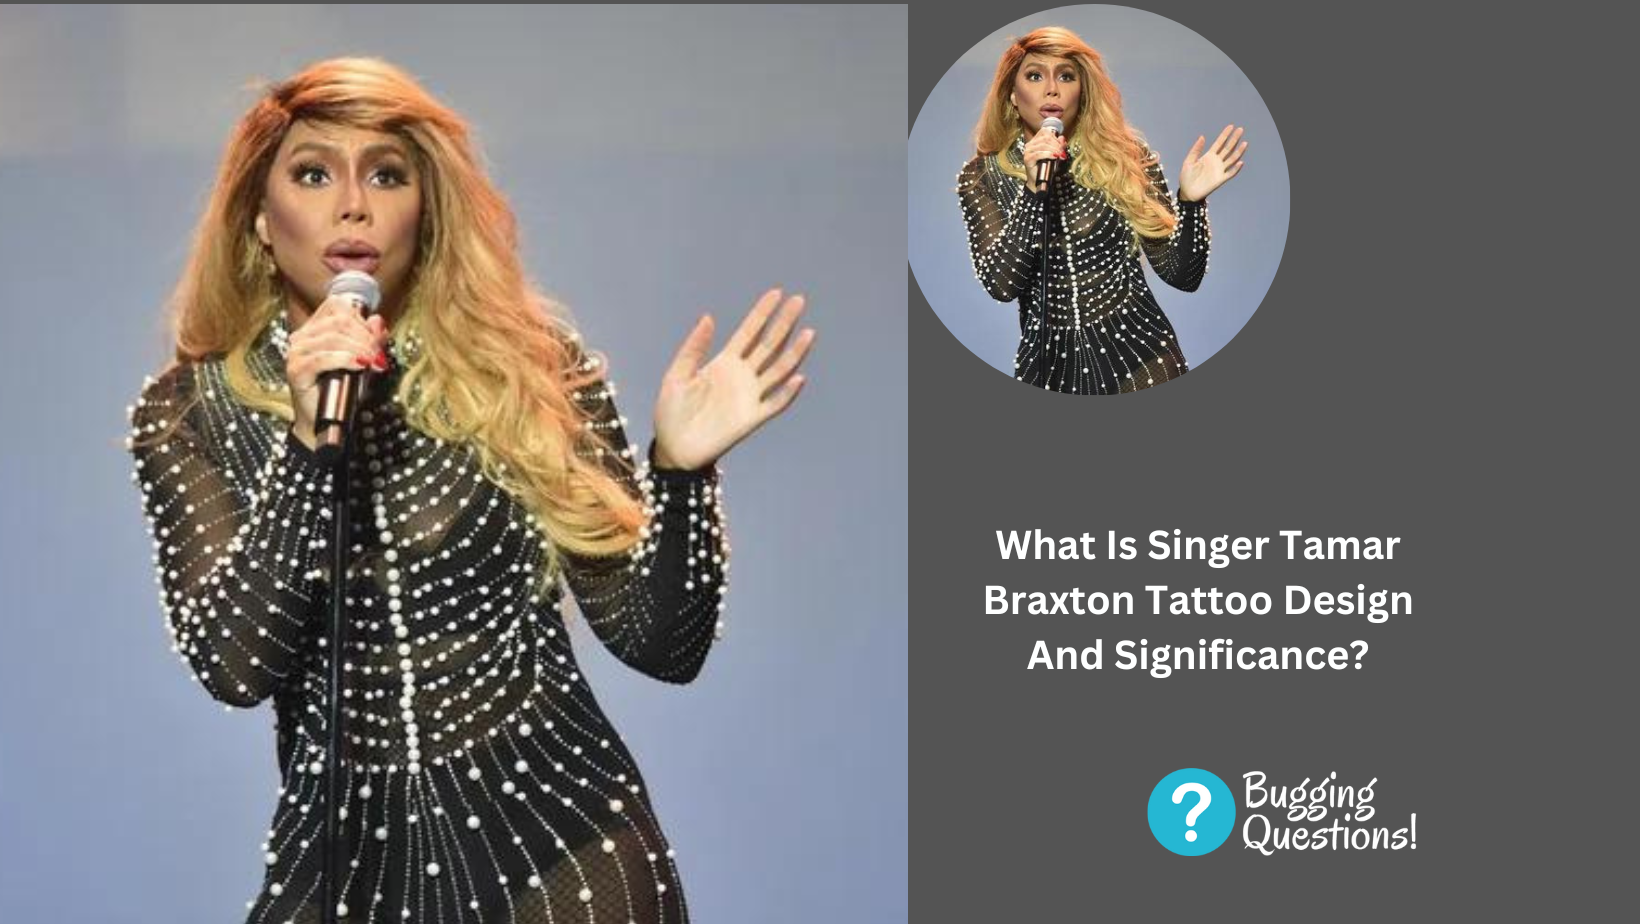 What Is Singer Tamar Braxton Tattoo Design And Significance?